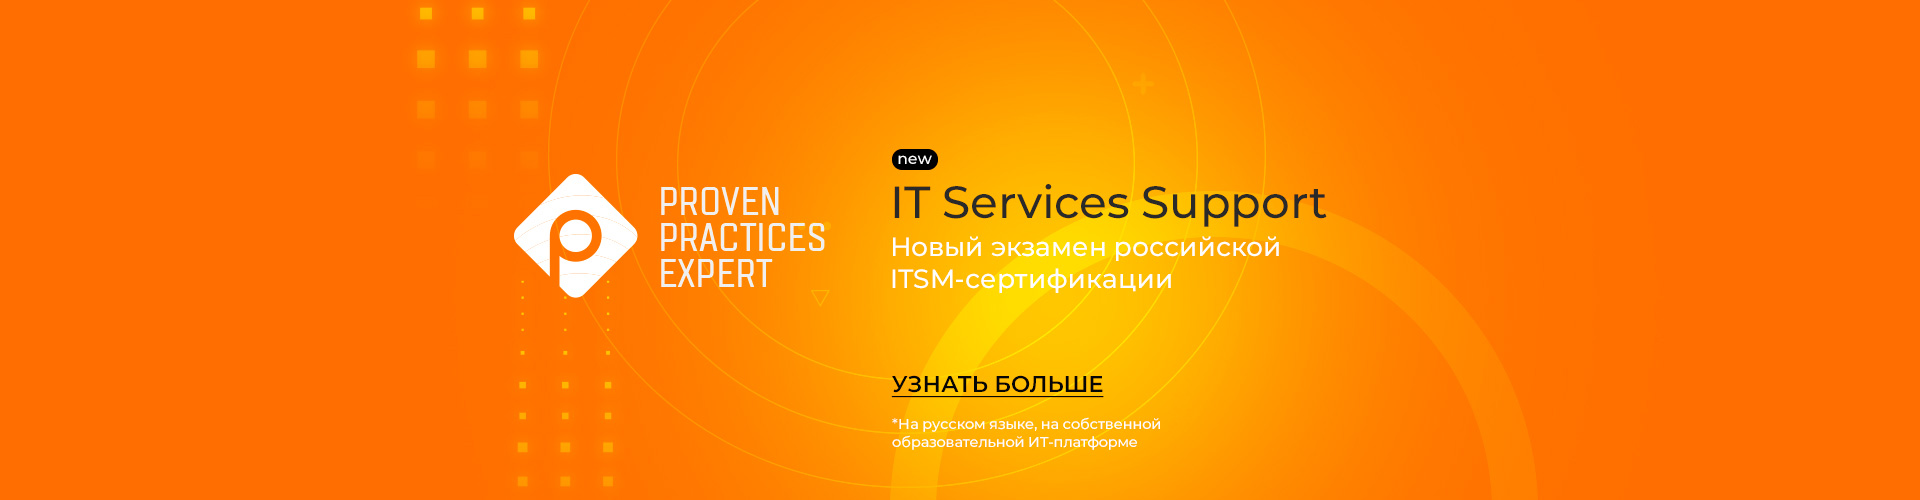 Proven Practices Expert: IT Services Support